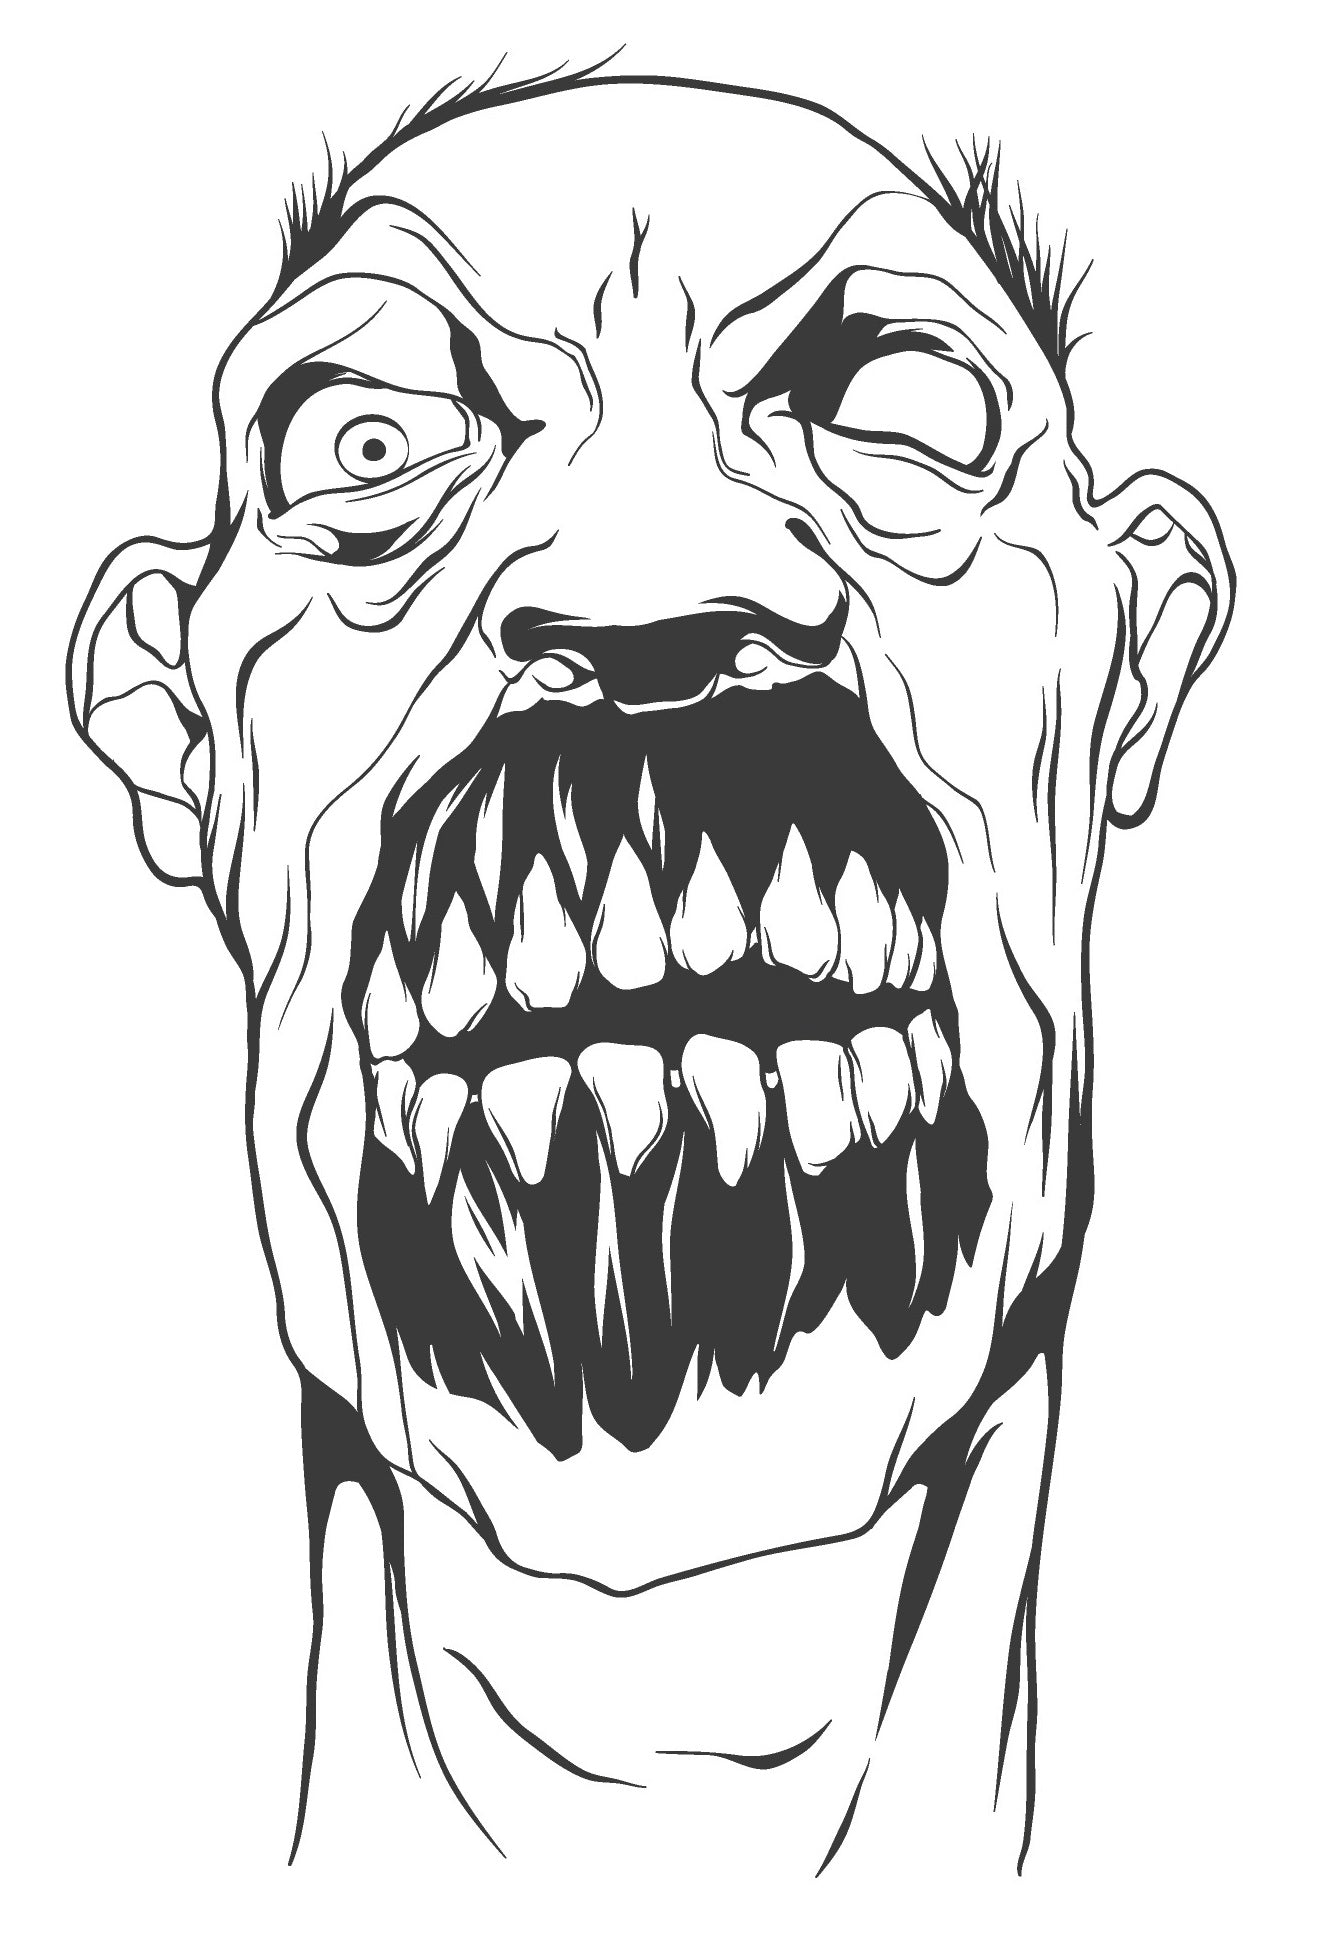 Horror Alley - Freaks Monsters Malice Horrid Faces PDF Coloring Book 